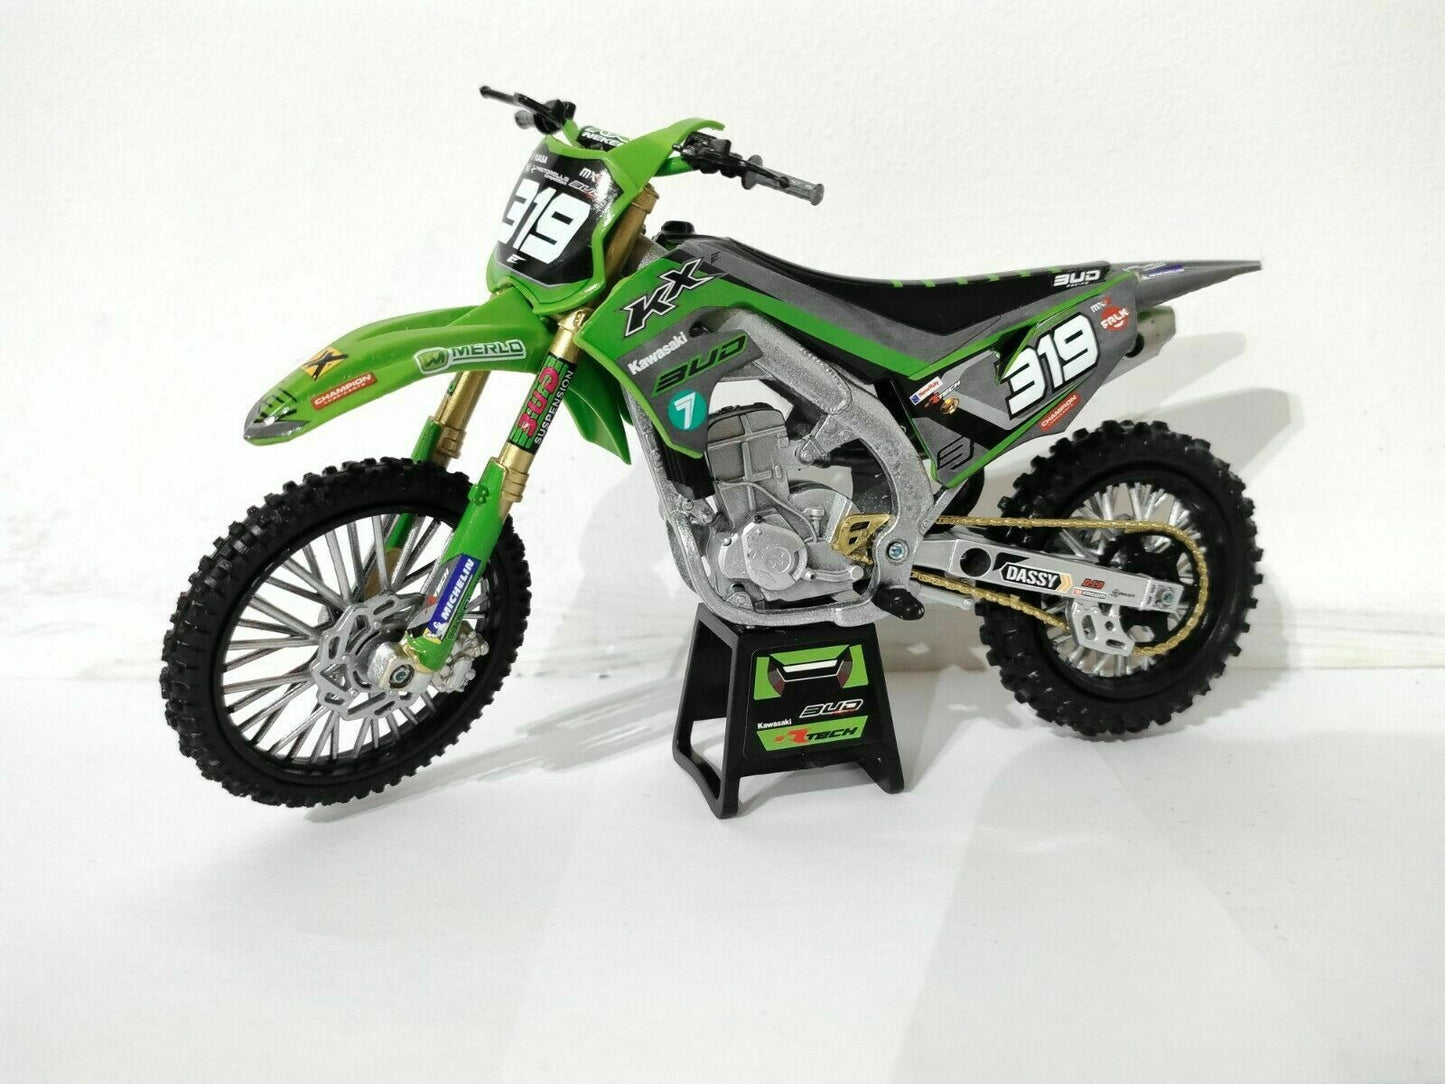 New Ray Toys 1:12 Quentin Marc Prugnieres #319 Bud Racing Kawasaki KXF 450 Toy Model - New Ray Toys